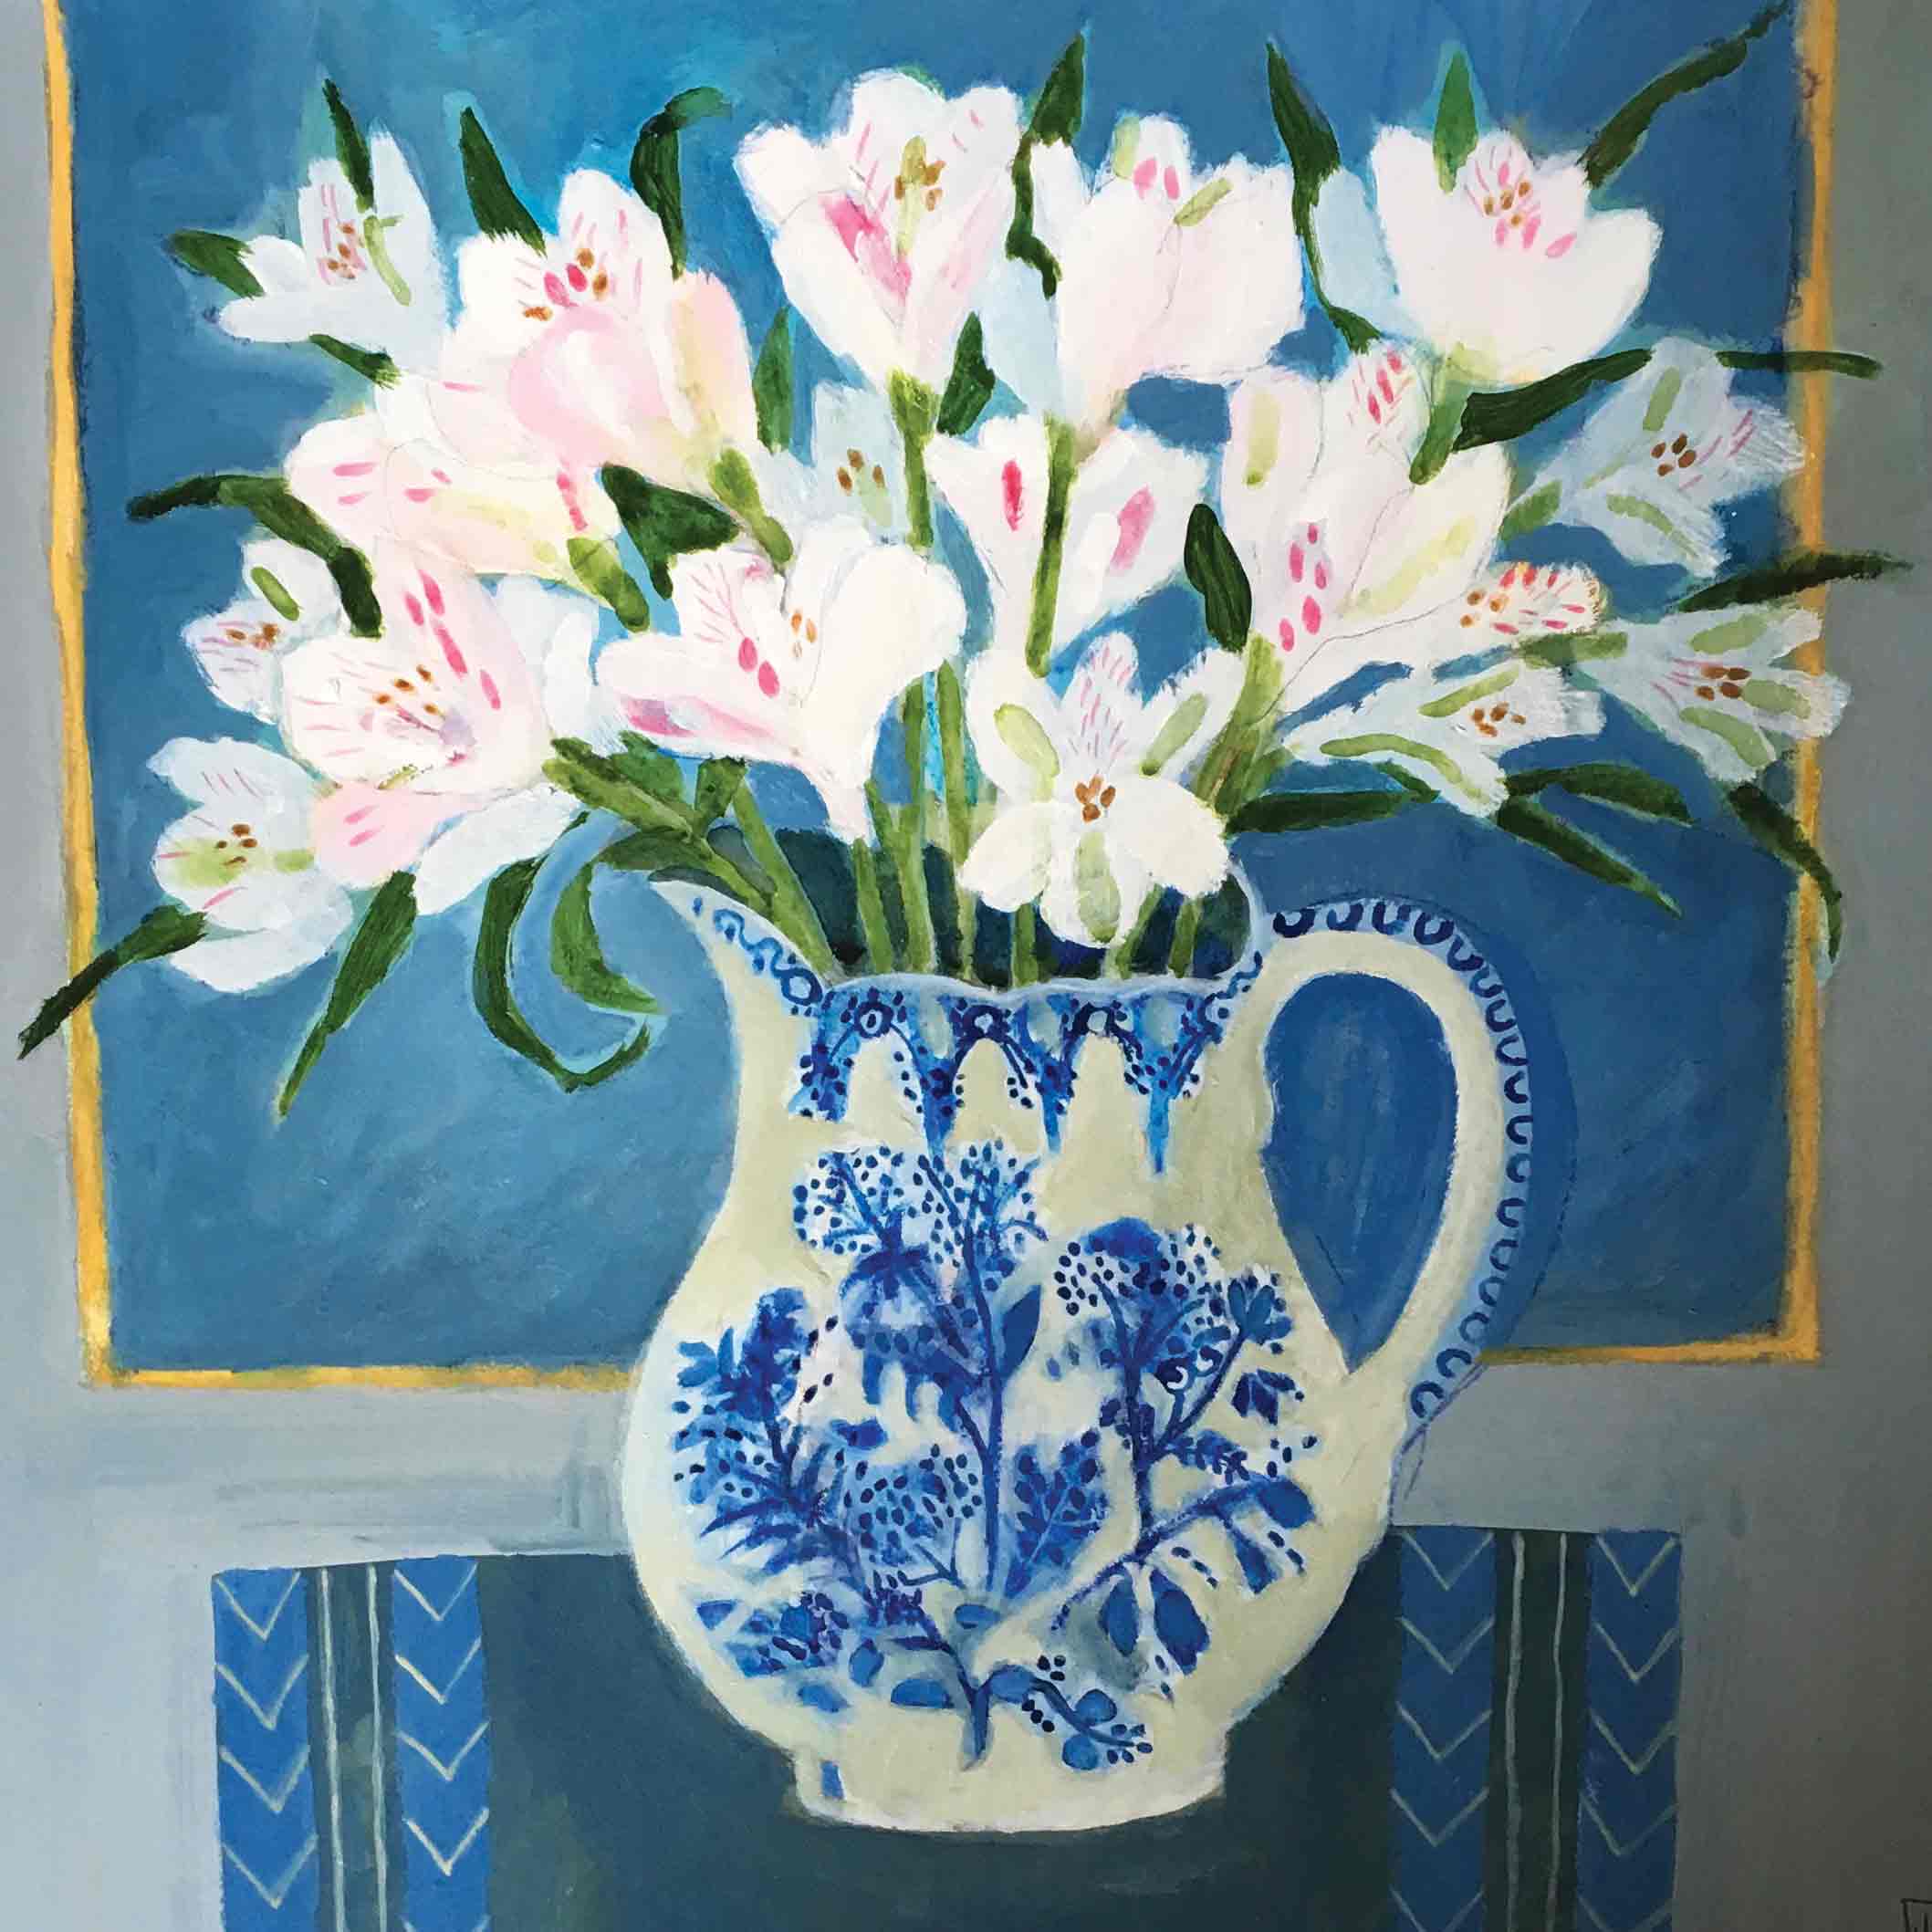 Art Greeting Card by Jill Leman, Peruvian Lillies, Acrylic on board, Lillies in vase on table